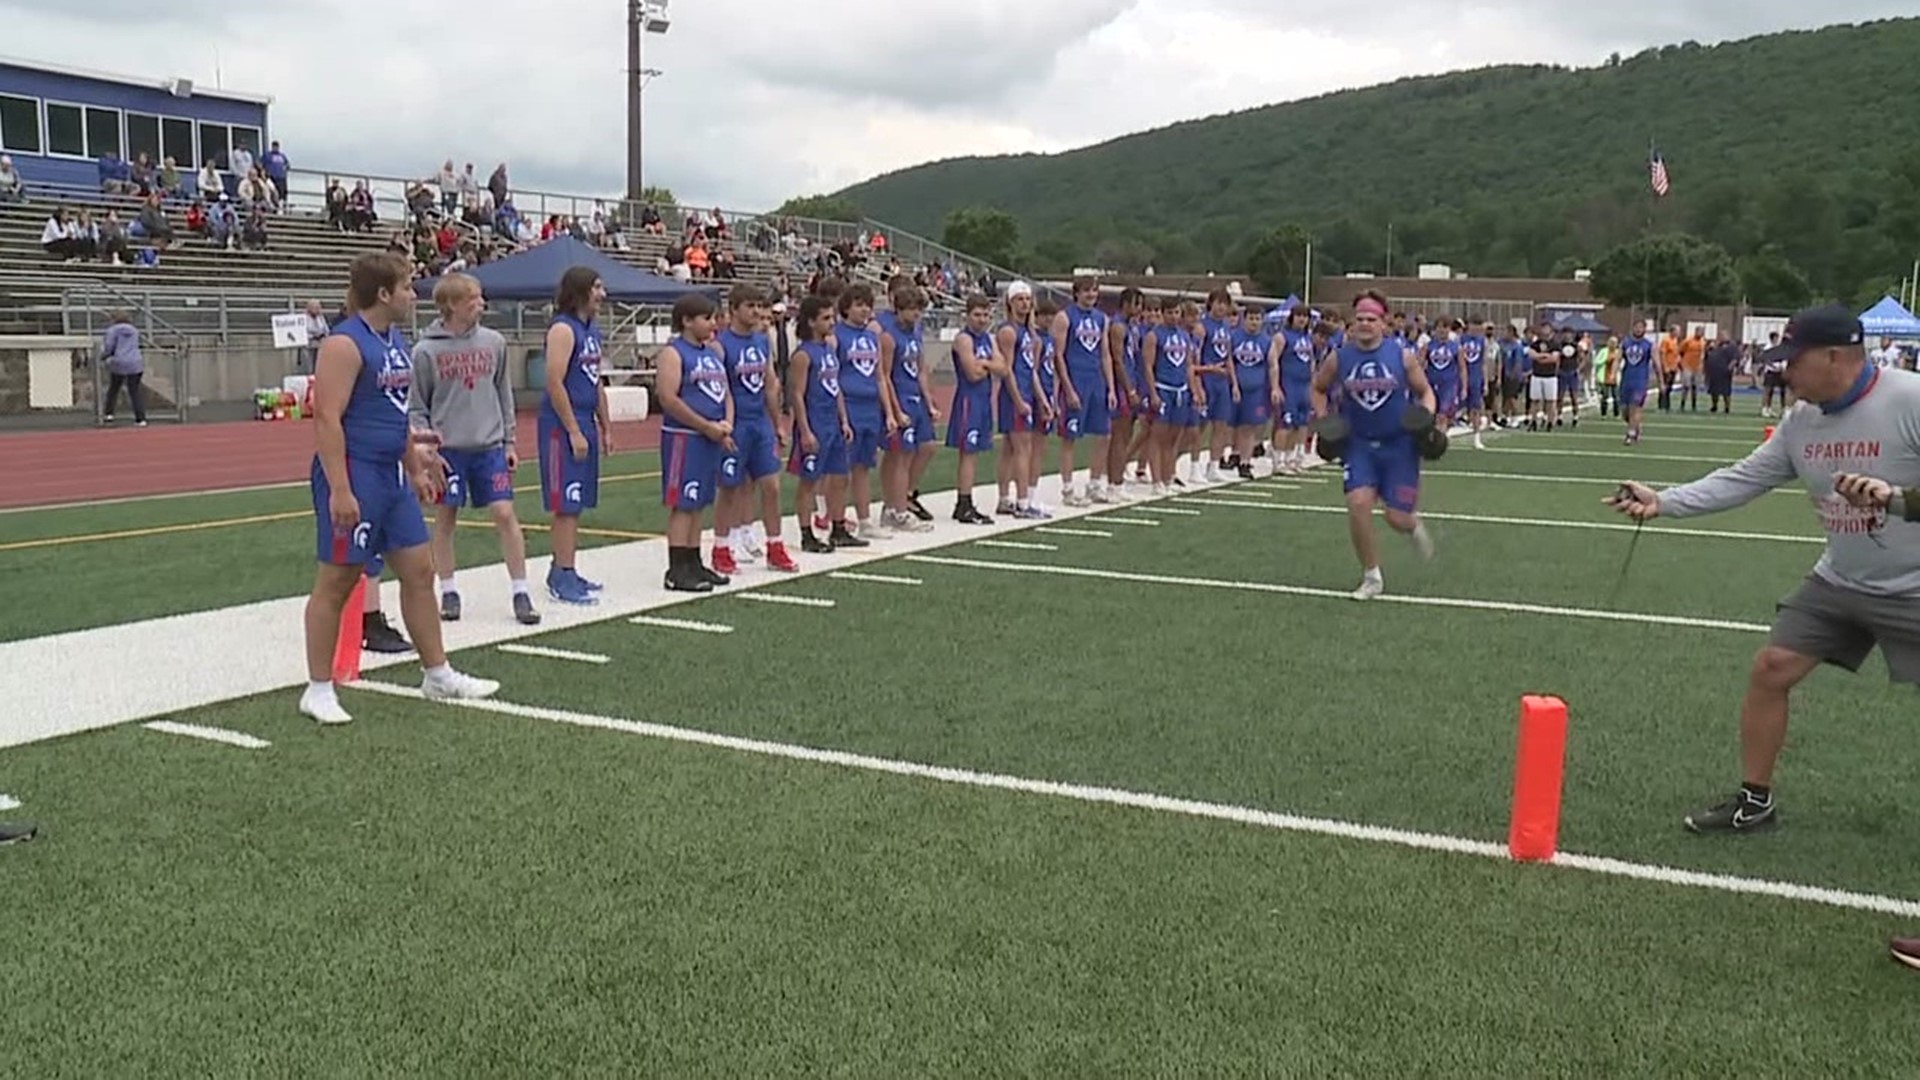 Players' agility, speed, and strength were put to the test on the gridiron in various races in Schuylkill County.